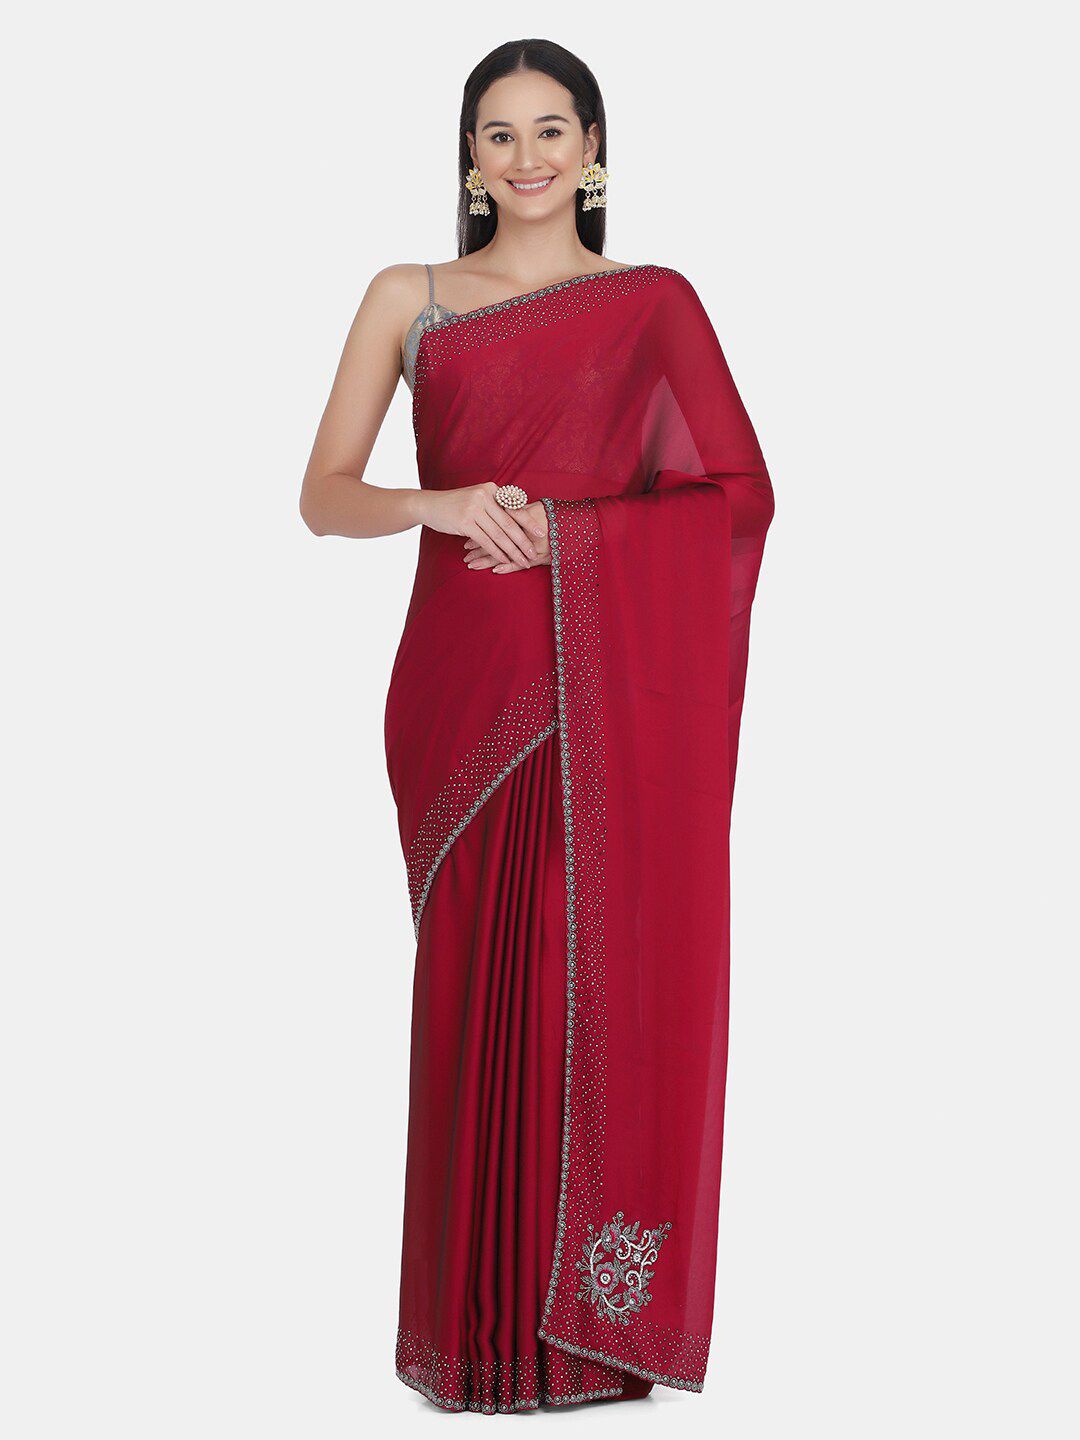 BOMBAY SELECTIONS Maroon & Grey Beads and Stones Art Silk Saree Price in India